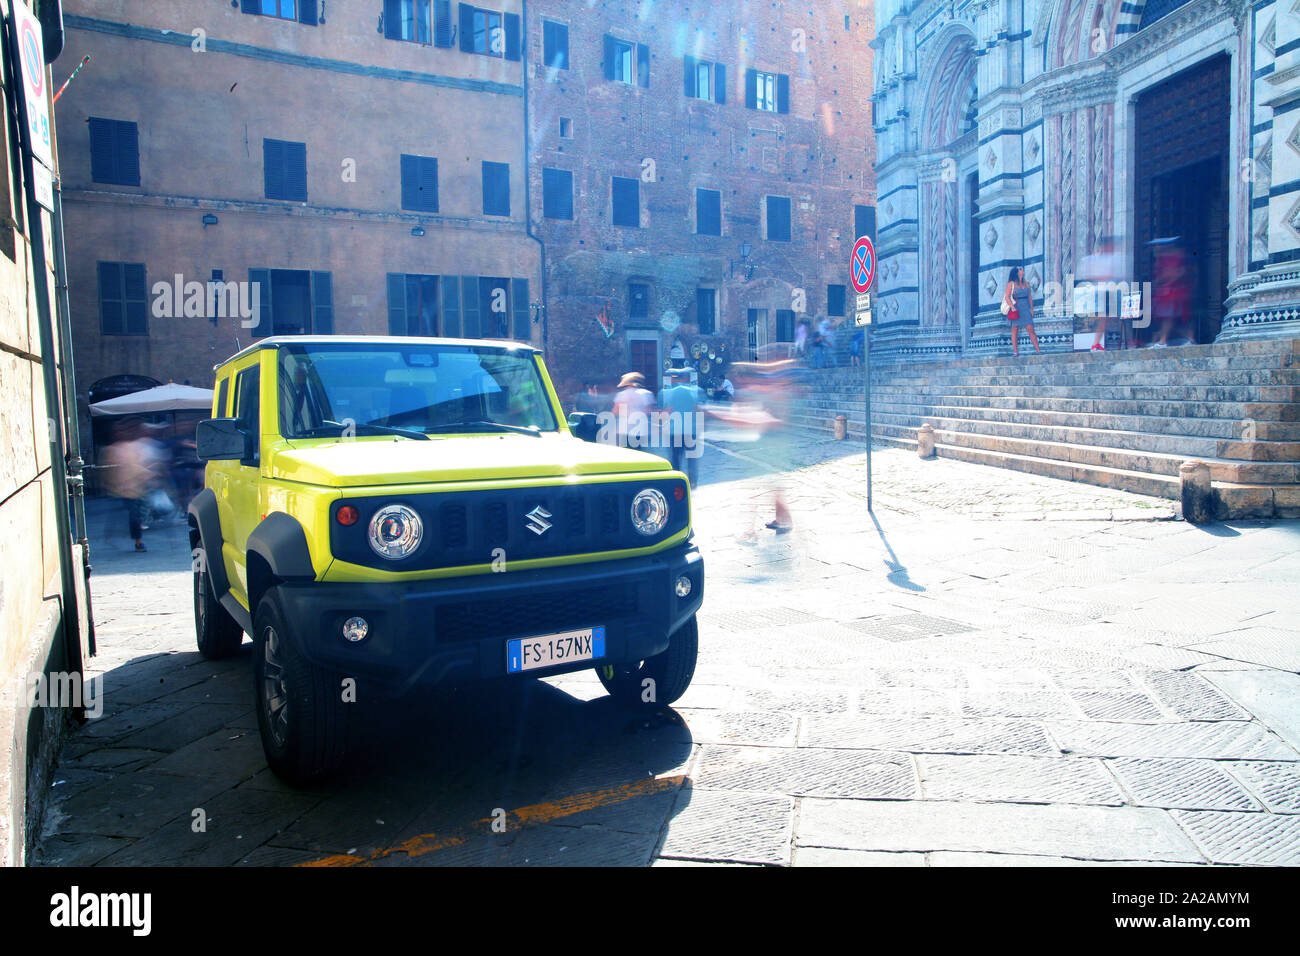 Sienna, Italy - A slow shutter motion shot of tourists, local people moving around a piazza in the city. The parked car a Jeep is still and in focus. Stock Photo